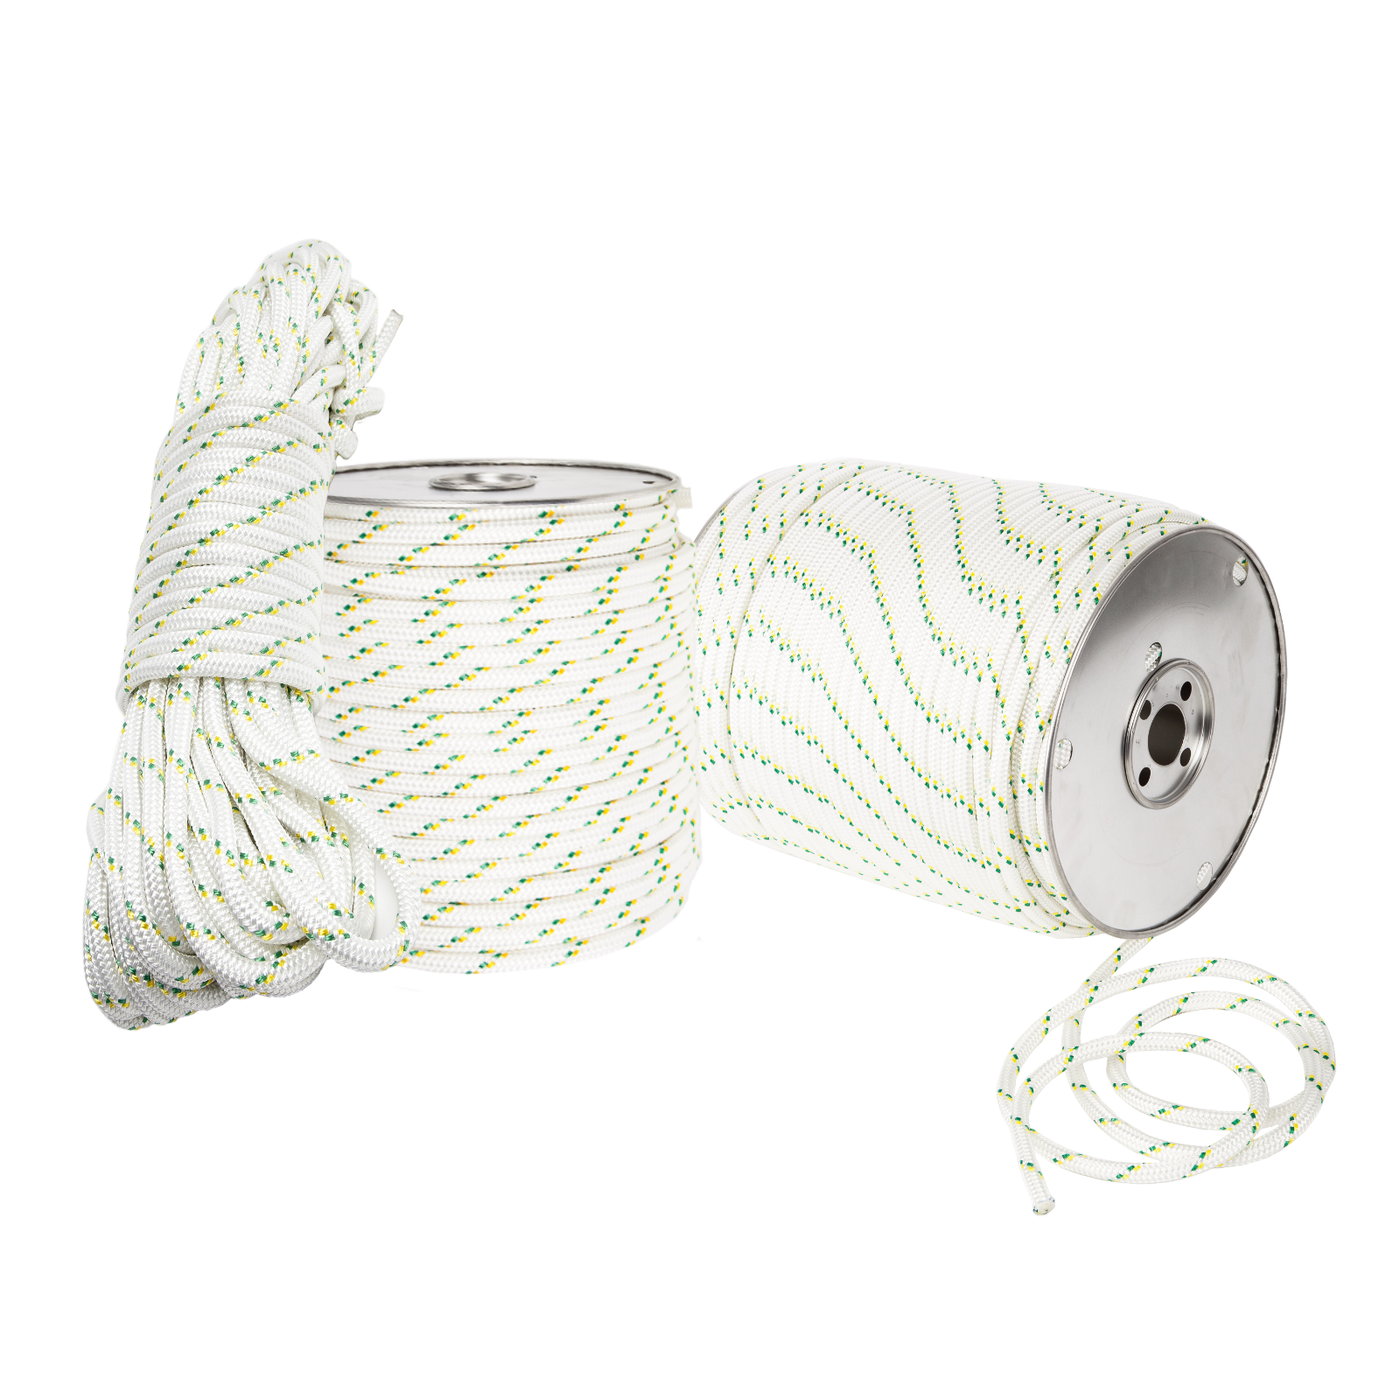 Portable Winch Pca-1205m Double-Braided Polyester Rope, 3/8 x 164